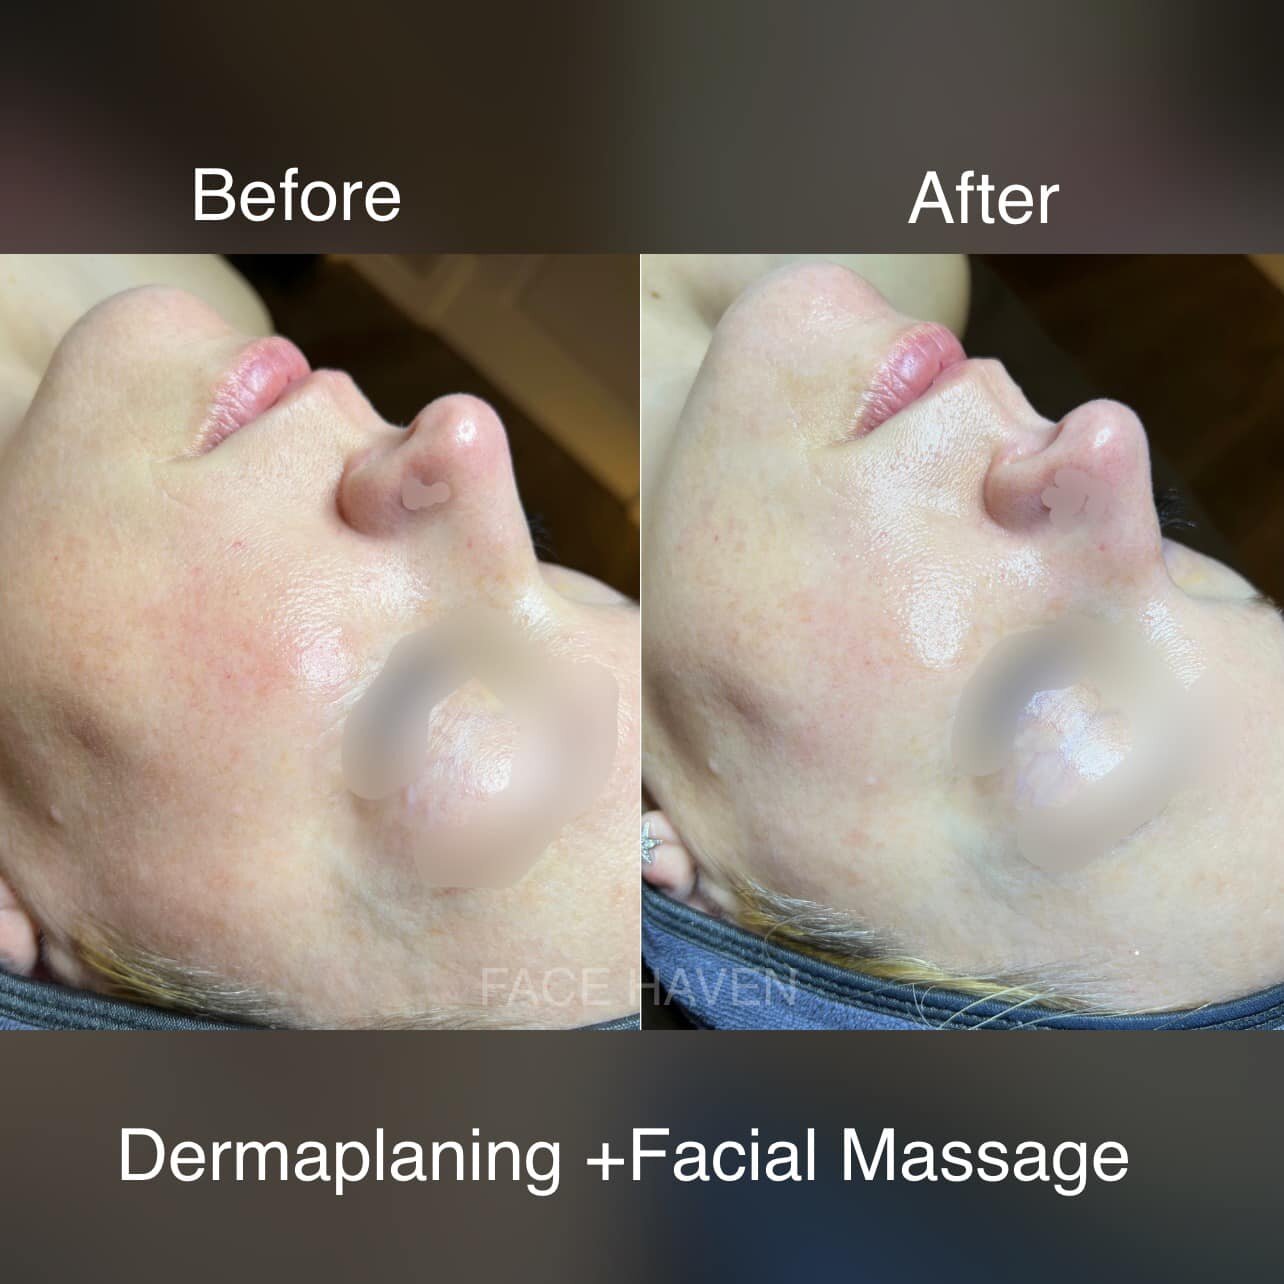 ✨Benefits of Dermaplaning✨
✅ Your skin look brighter, smoother, and glowing
✅ Skincare products penetrate the skin more effectively
✅ It smooths out fine lines and wrinkles.
✅ It reduces the appearance of acne scars.
✅ Your foundation applies more sm